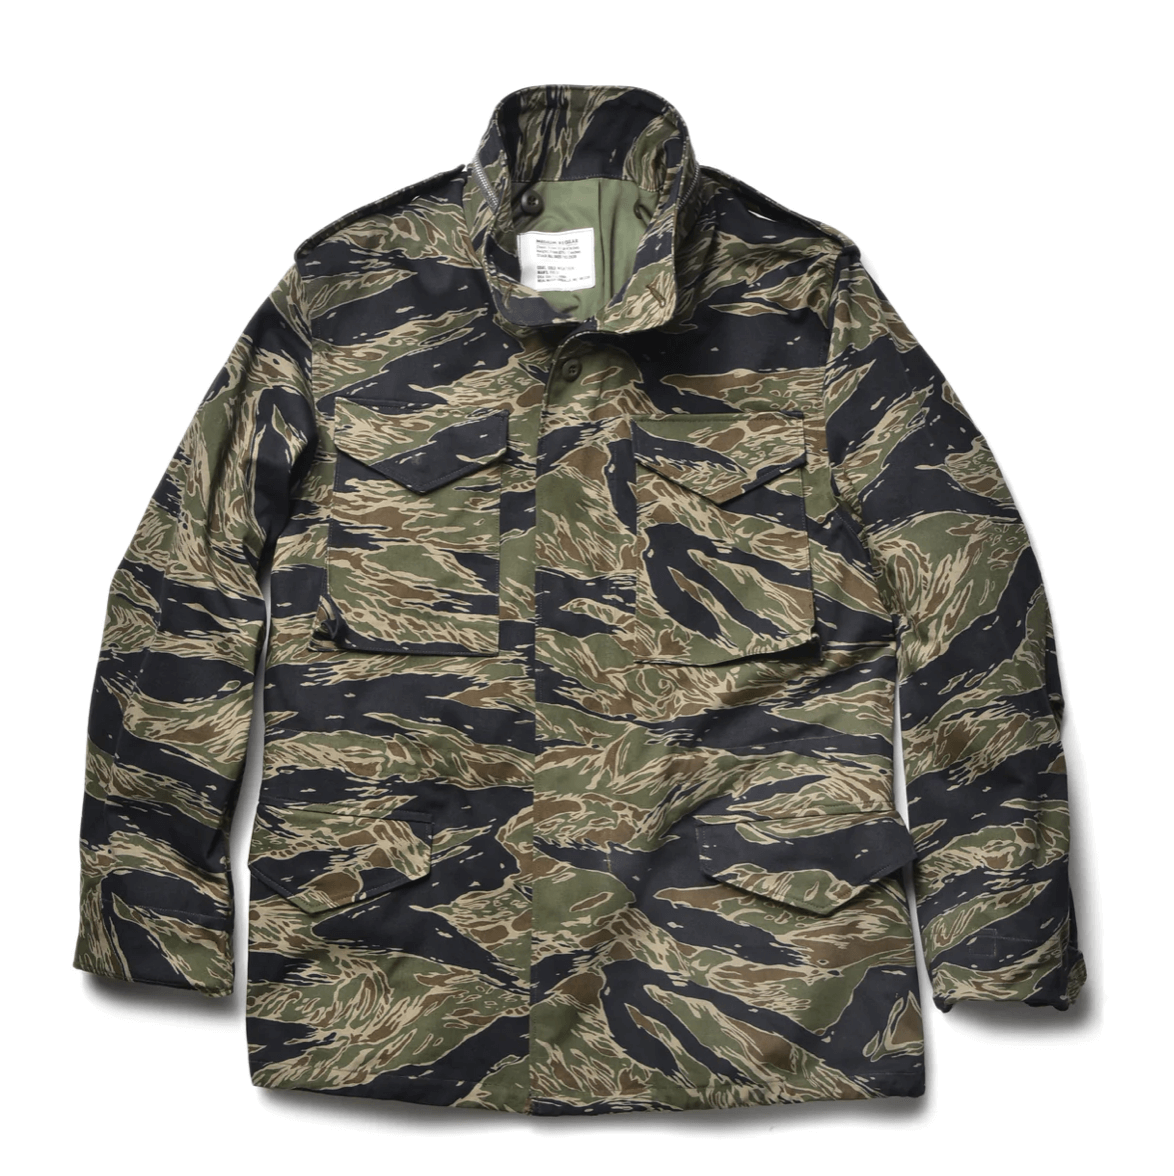 The M65 Jacket is Dope. But So is The Liner.